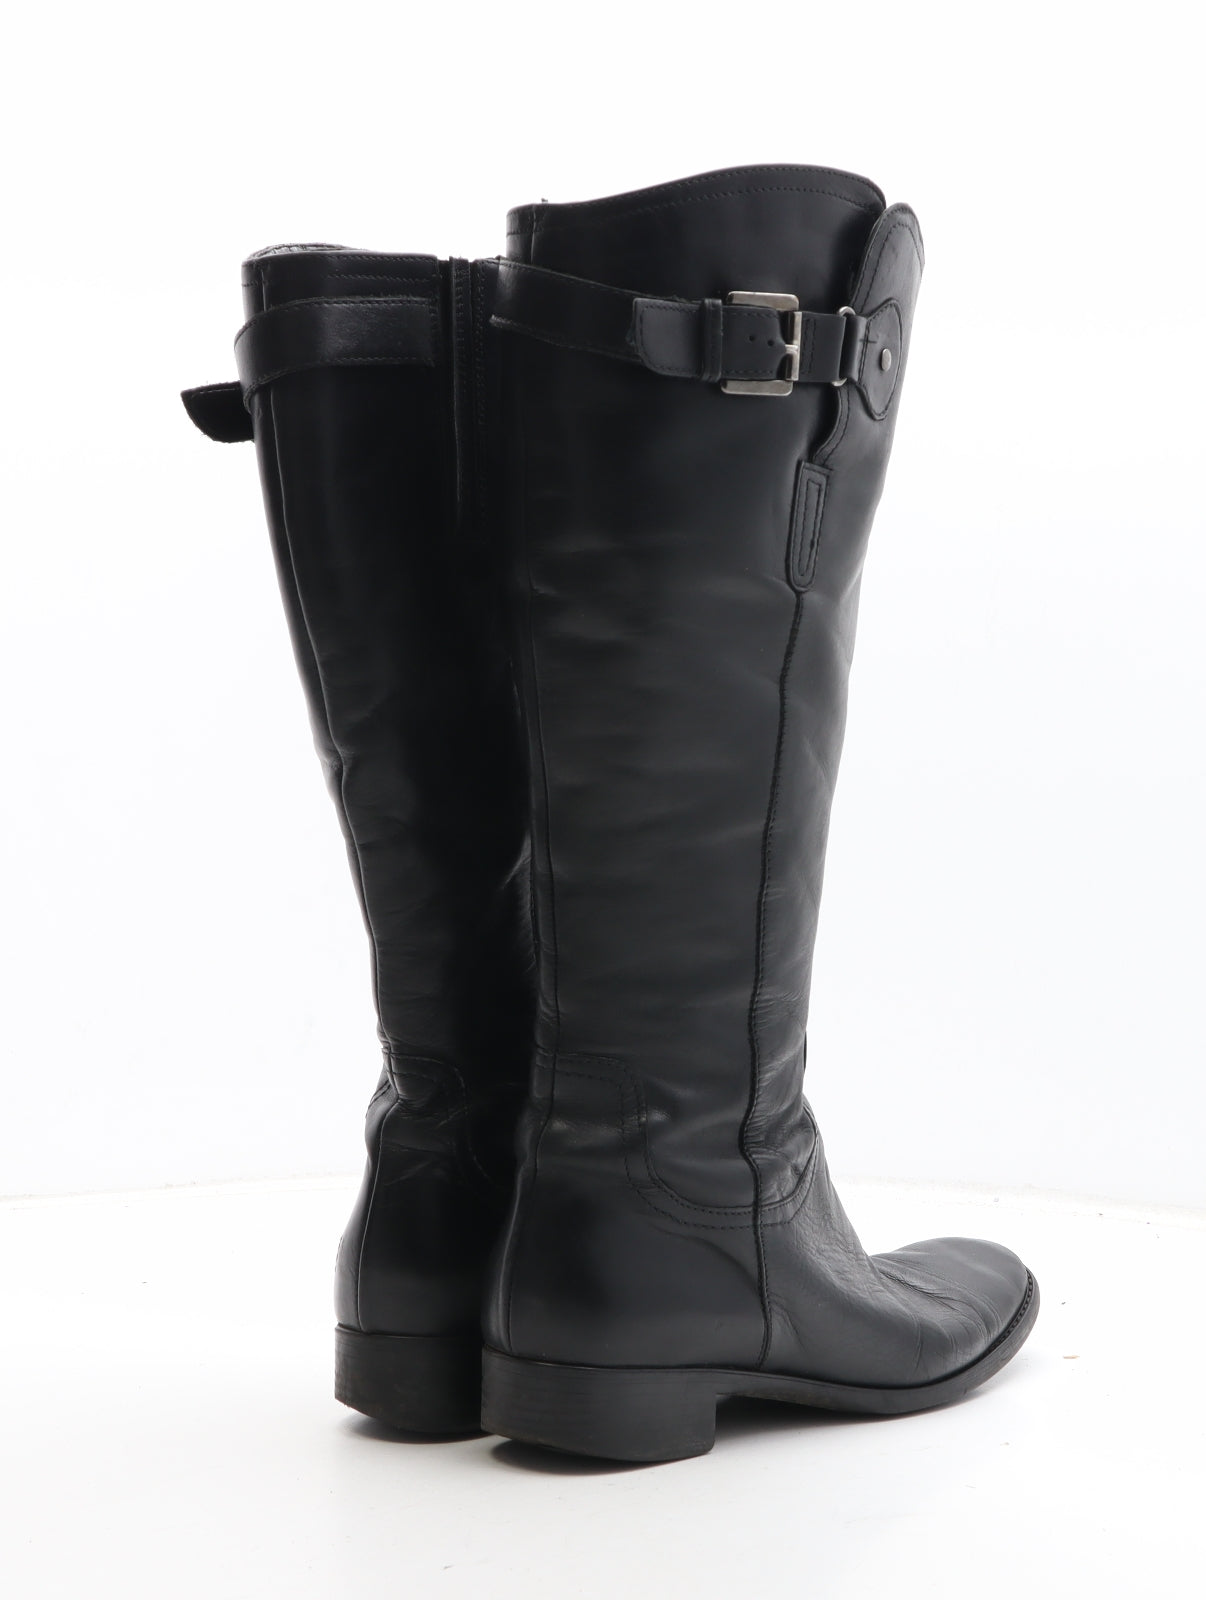 Preworn Womens Black Synthetic Bootie Boot UK